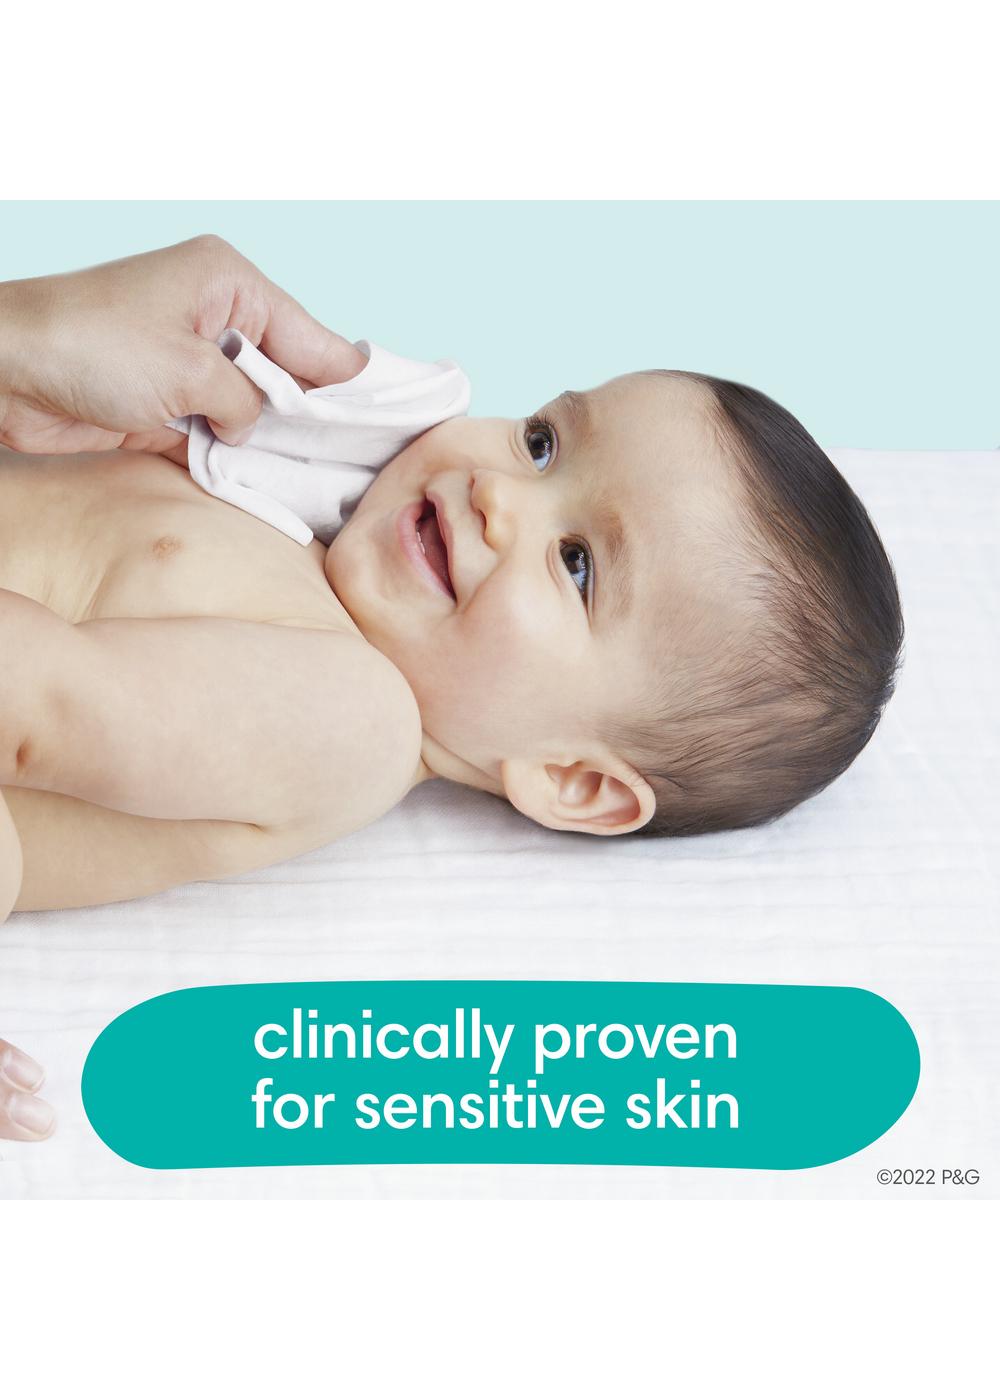 Pampers Sensitive Skin Baby Wipes 7 Pk; image 9 of 9